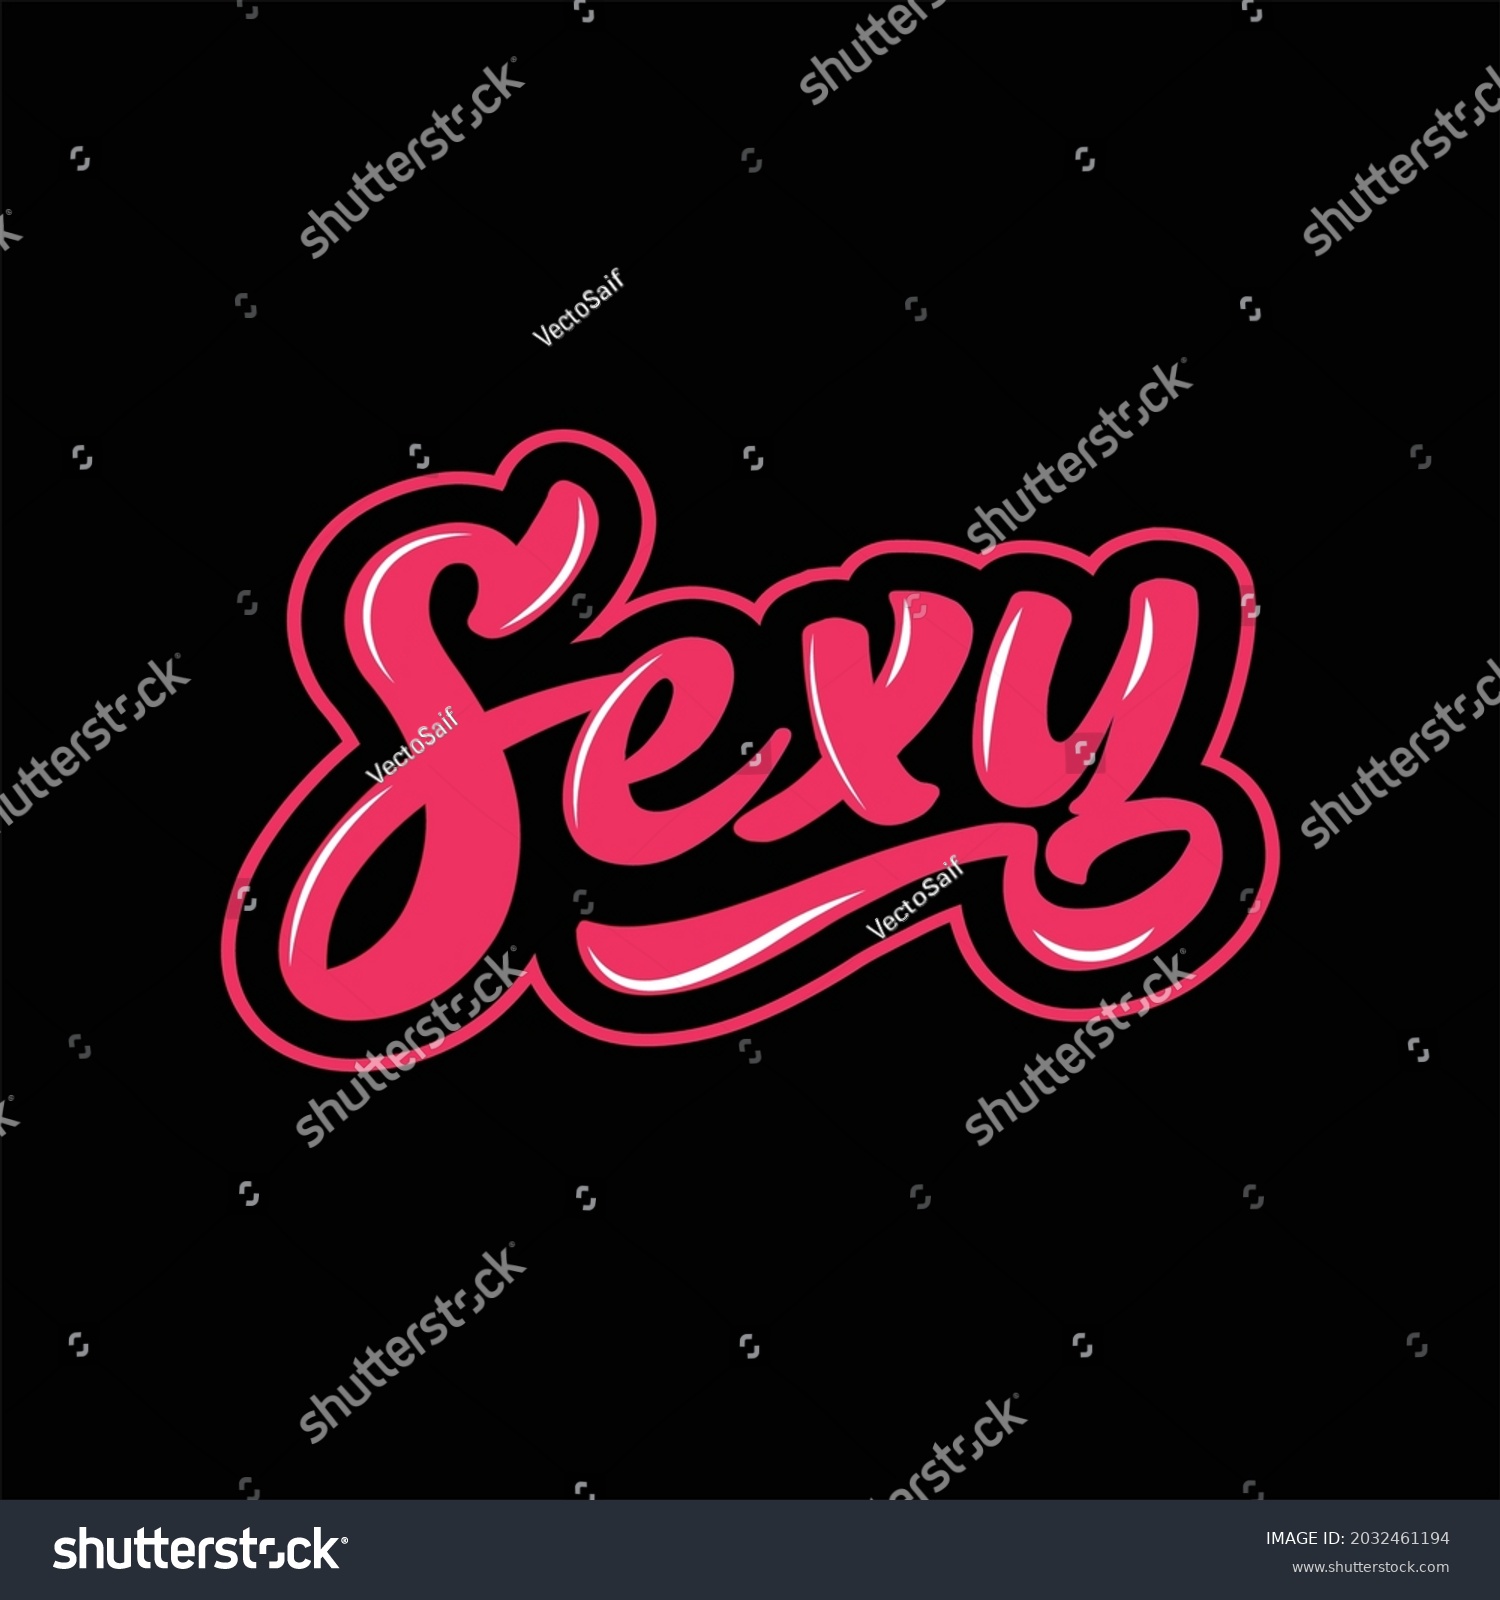 Sexy Word Typography Design Vector Stock Vector Royalty Free 2032461194 Shutterstock 7844